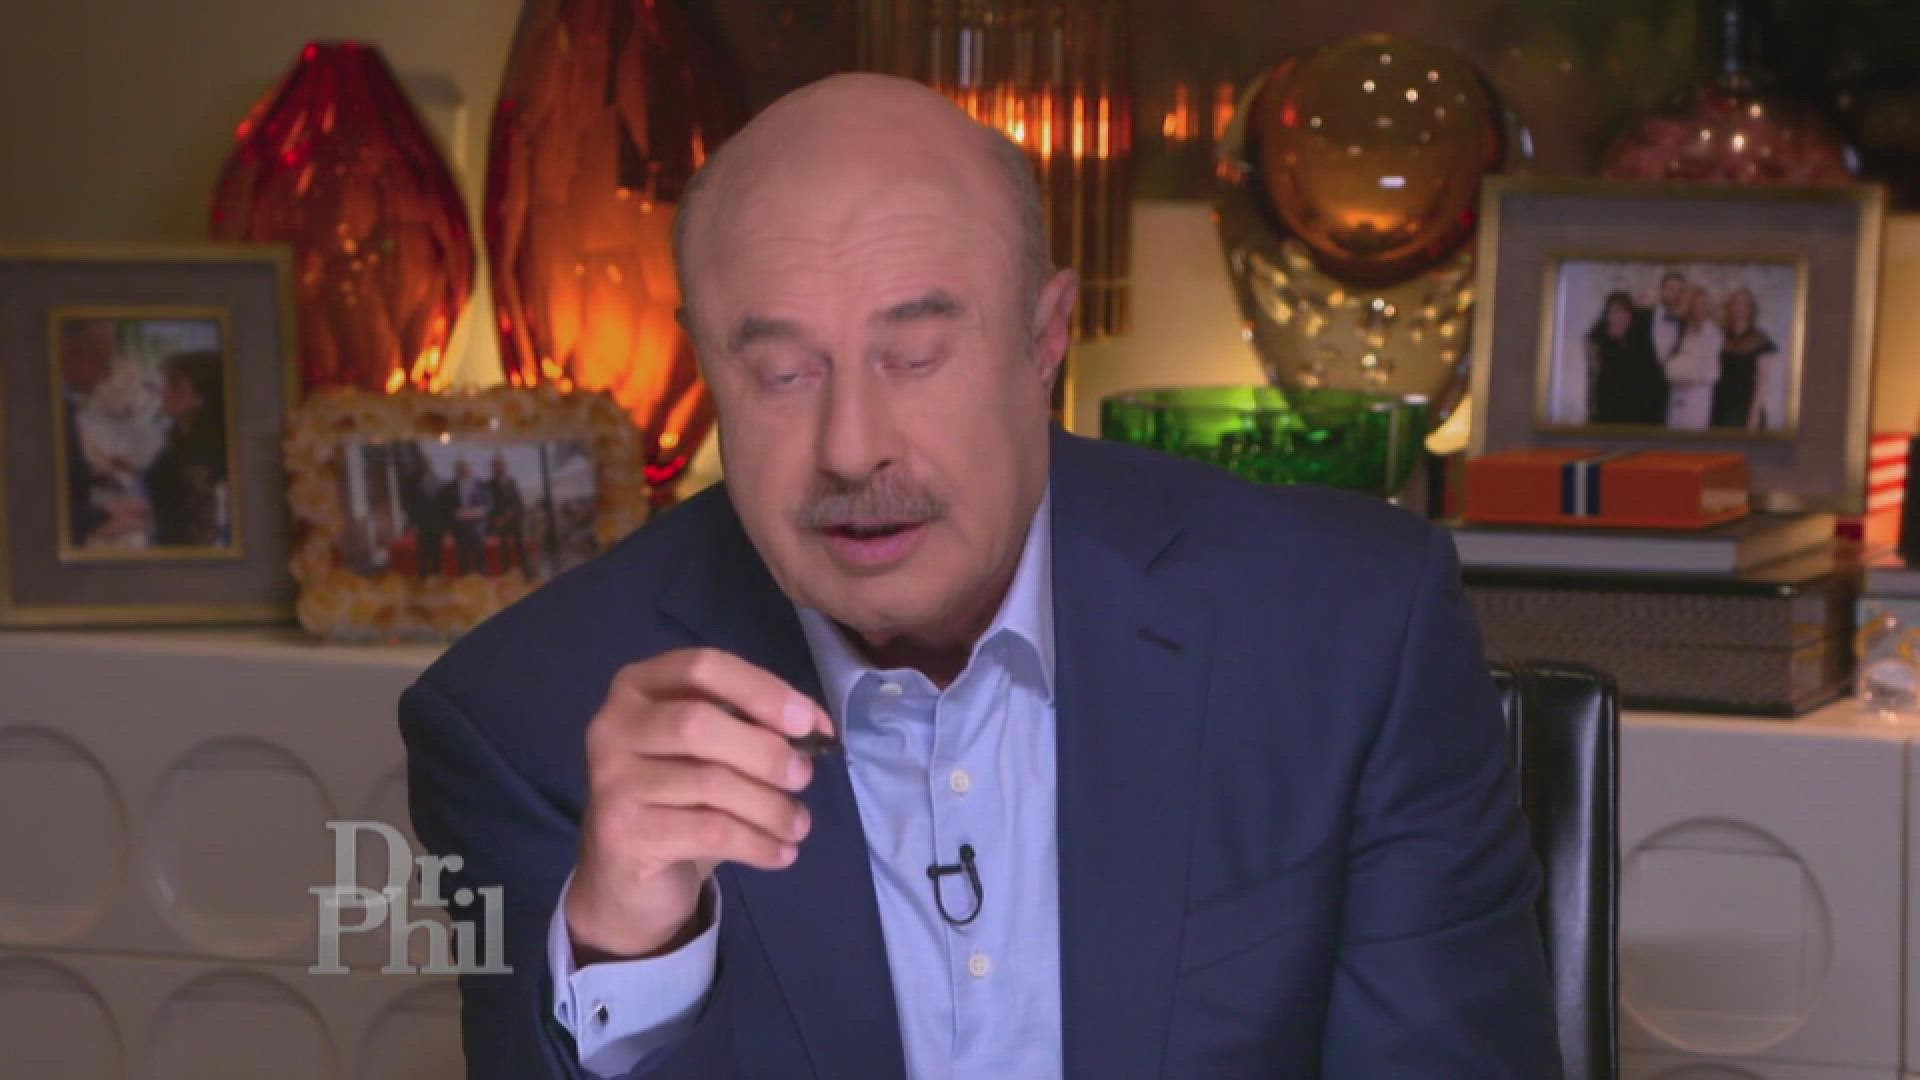 Gabby Petito's father, Joe Petito, spoke with Dr. Phil prior to the FBI's discovery of a body that matched the description of Gabby.